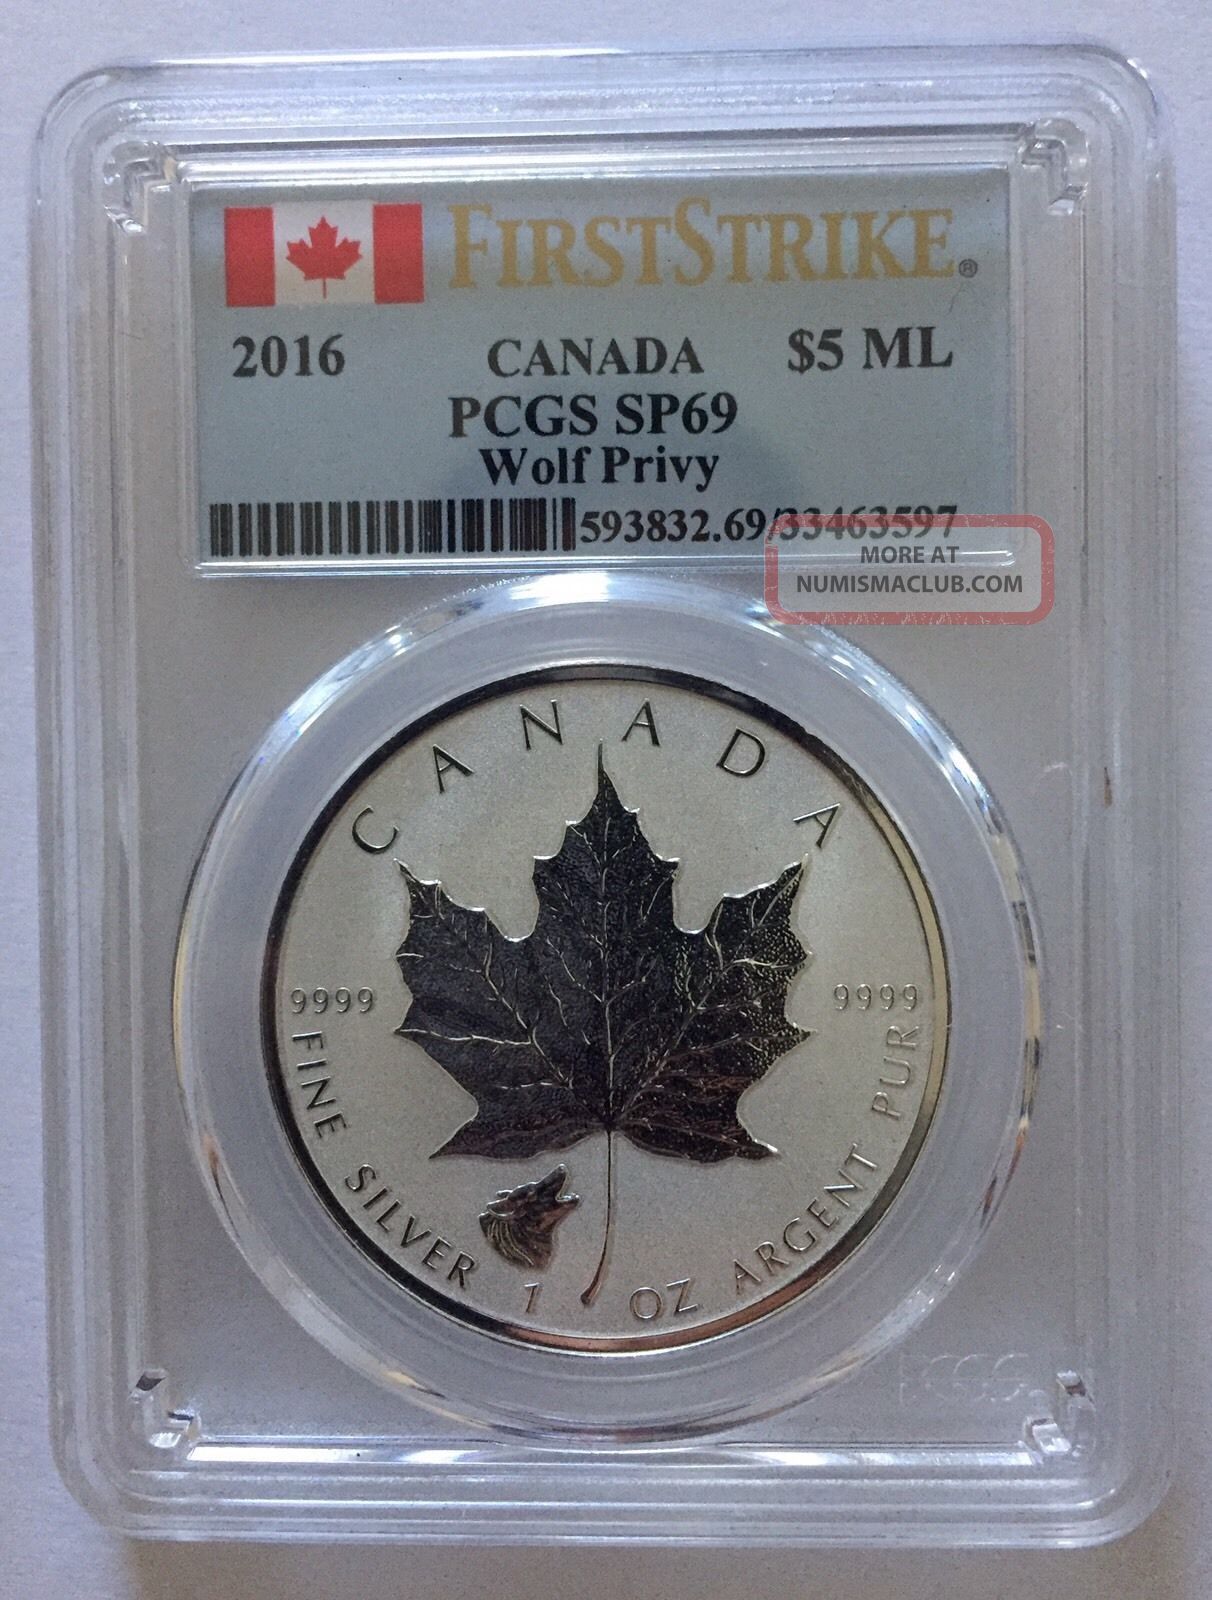 2016 Wolf Privy Canadian Silver Maple Leaf Reverse Proof Coin Pcgs Sp69 Fs Commemorative photo